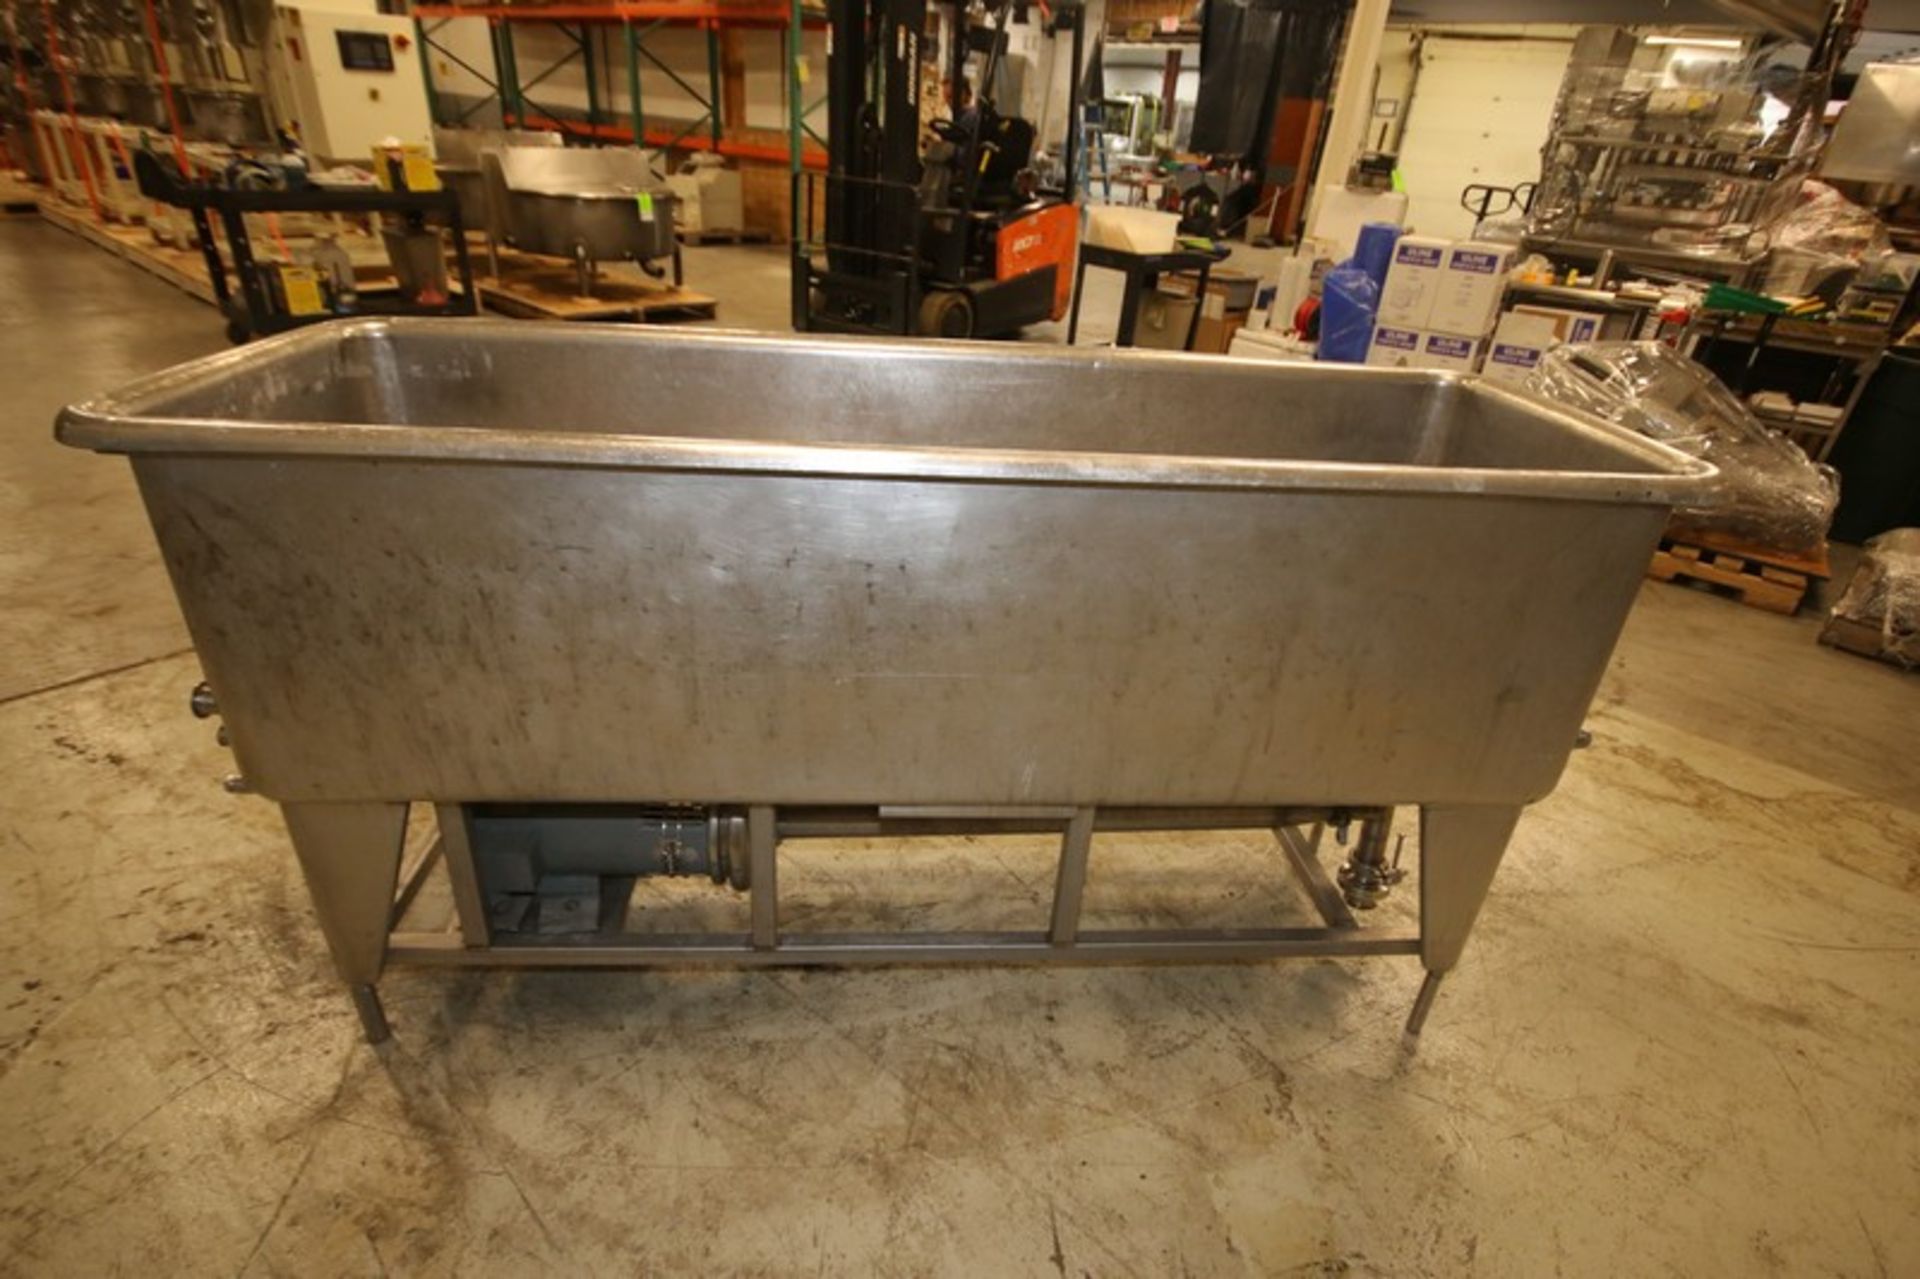 76" L x 24" W x 22" D S/S Jet Spray Wash Trough, Model PM-6, SN 73013110, with Tri Clover 5 hp / - Image 6 of 9